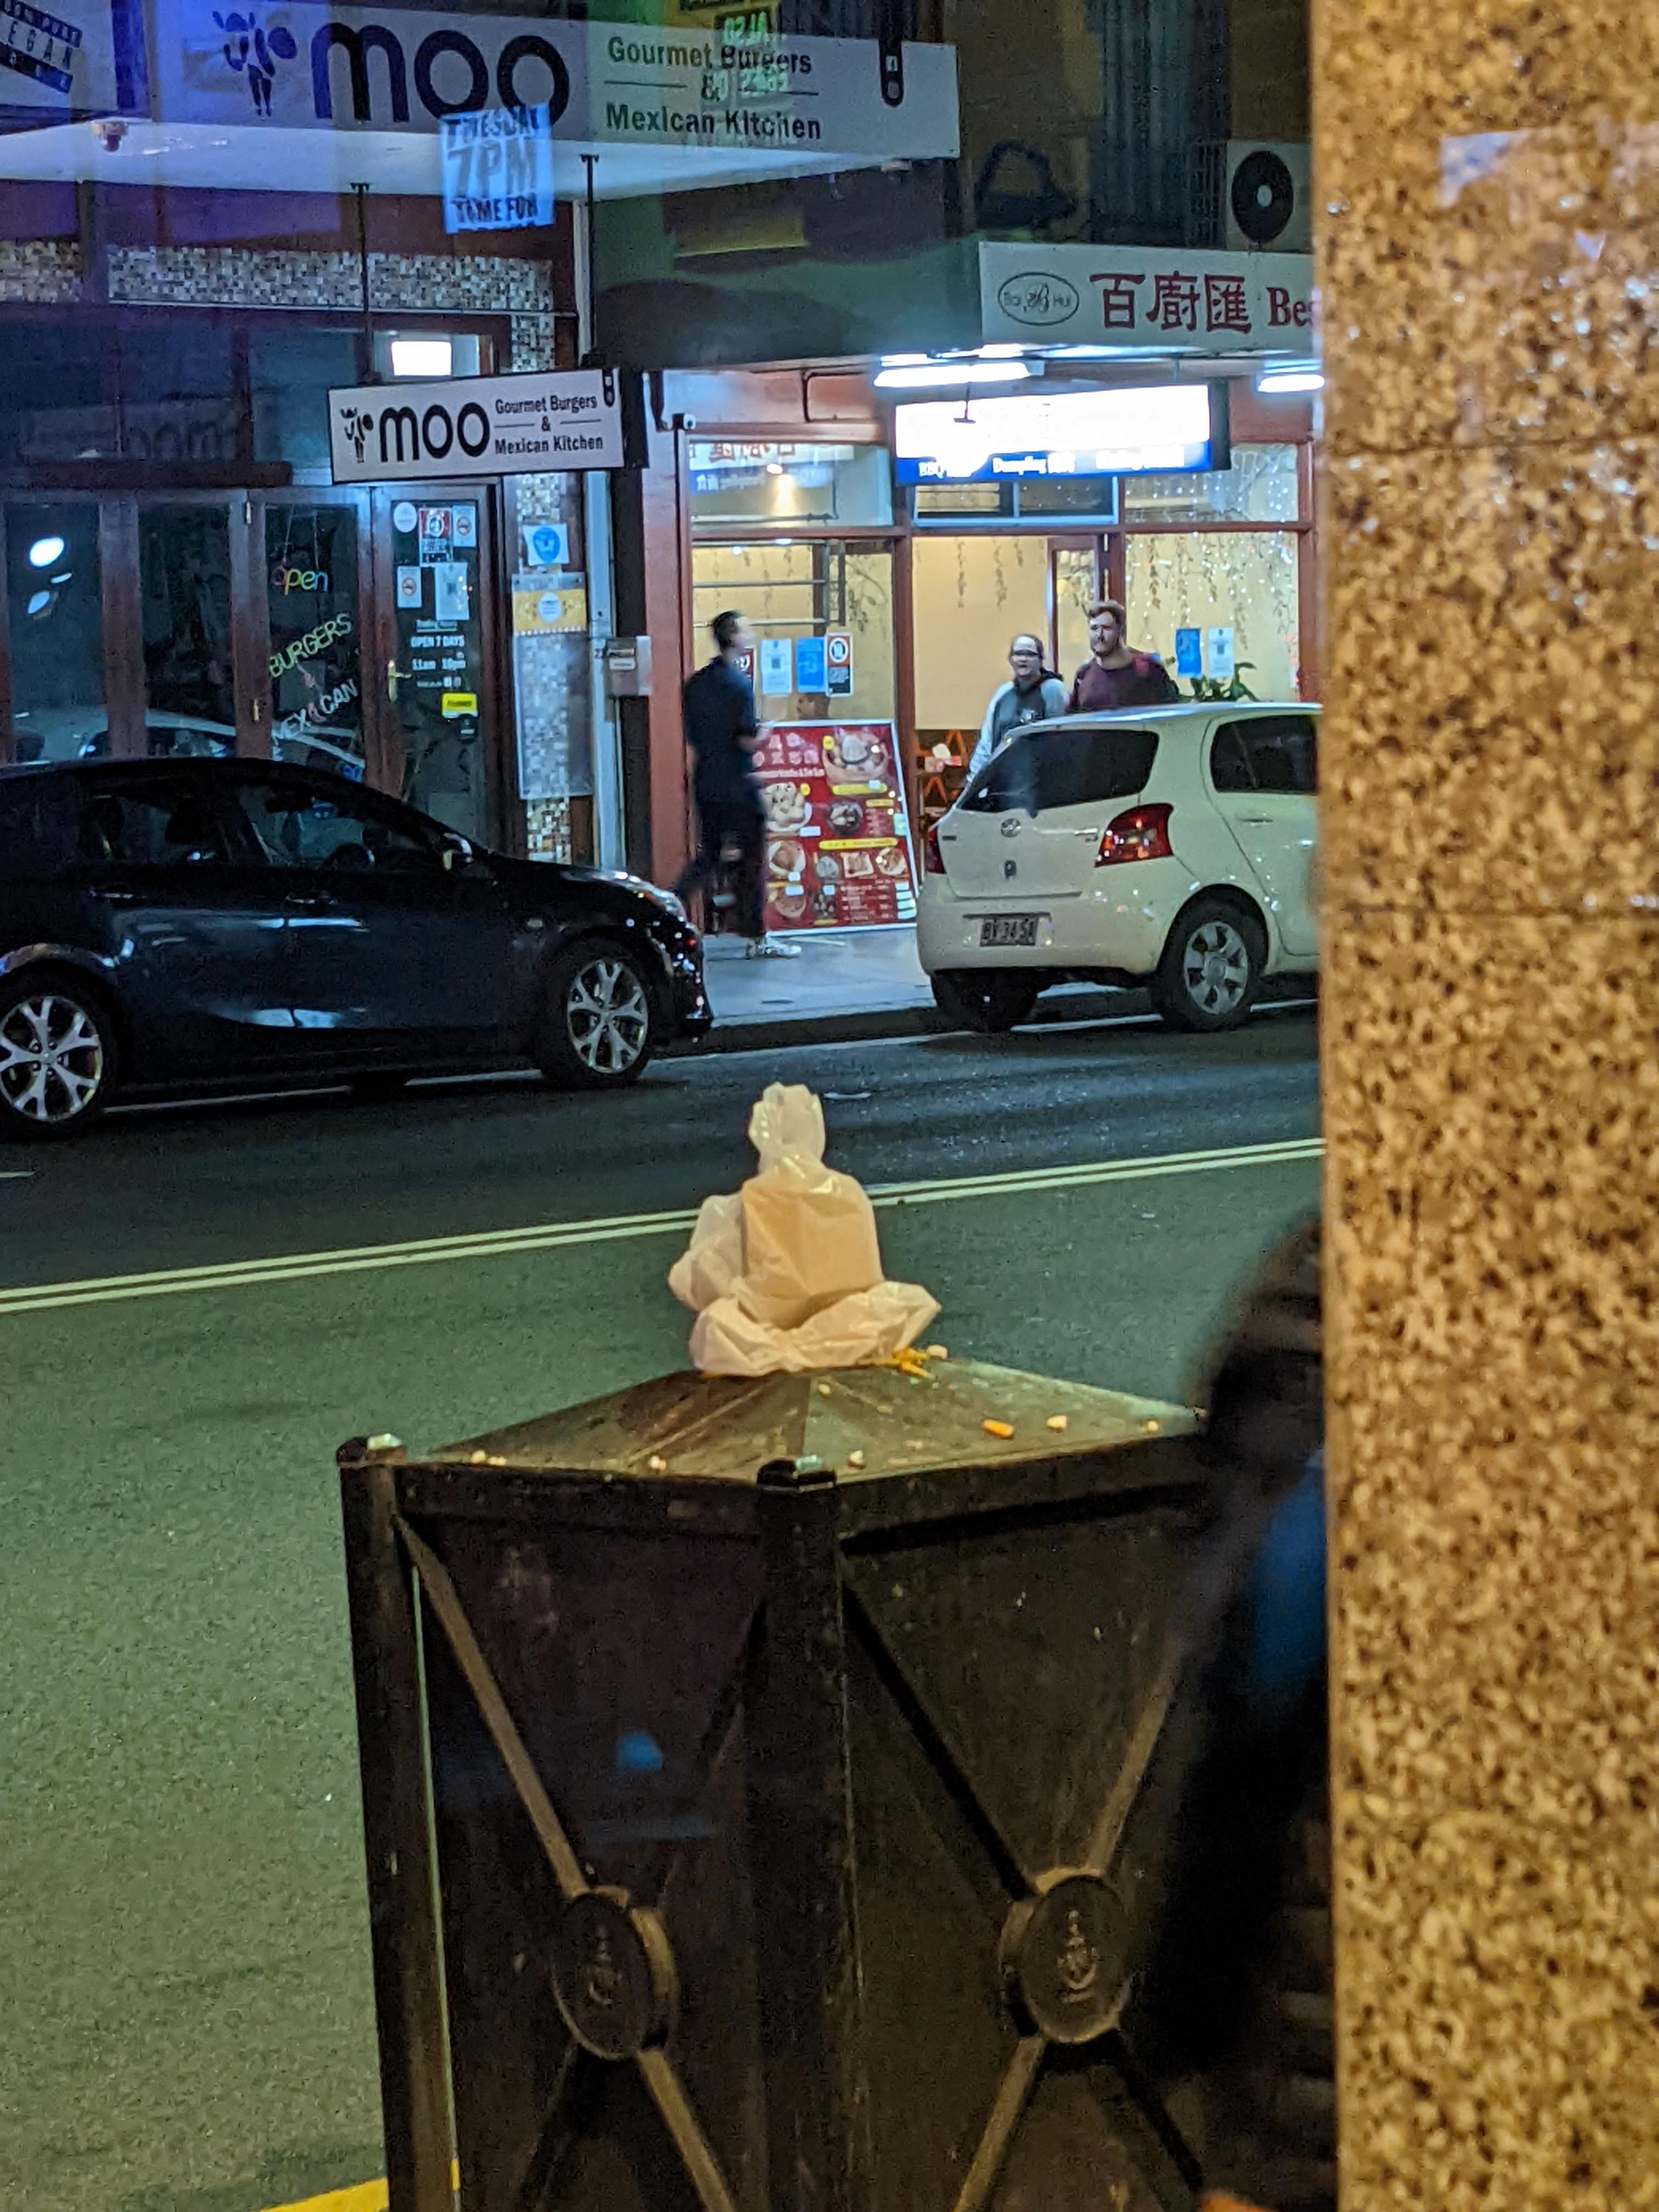 May I introduce to you Bin Buddha........the most enlightened of them all